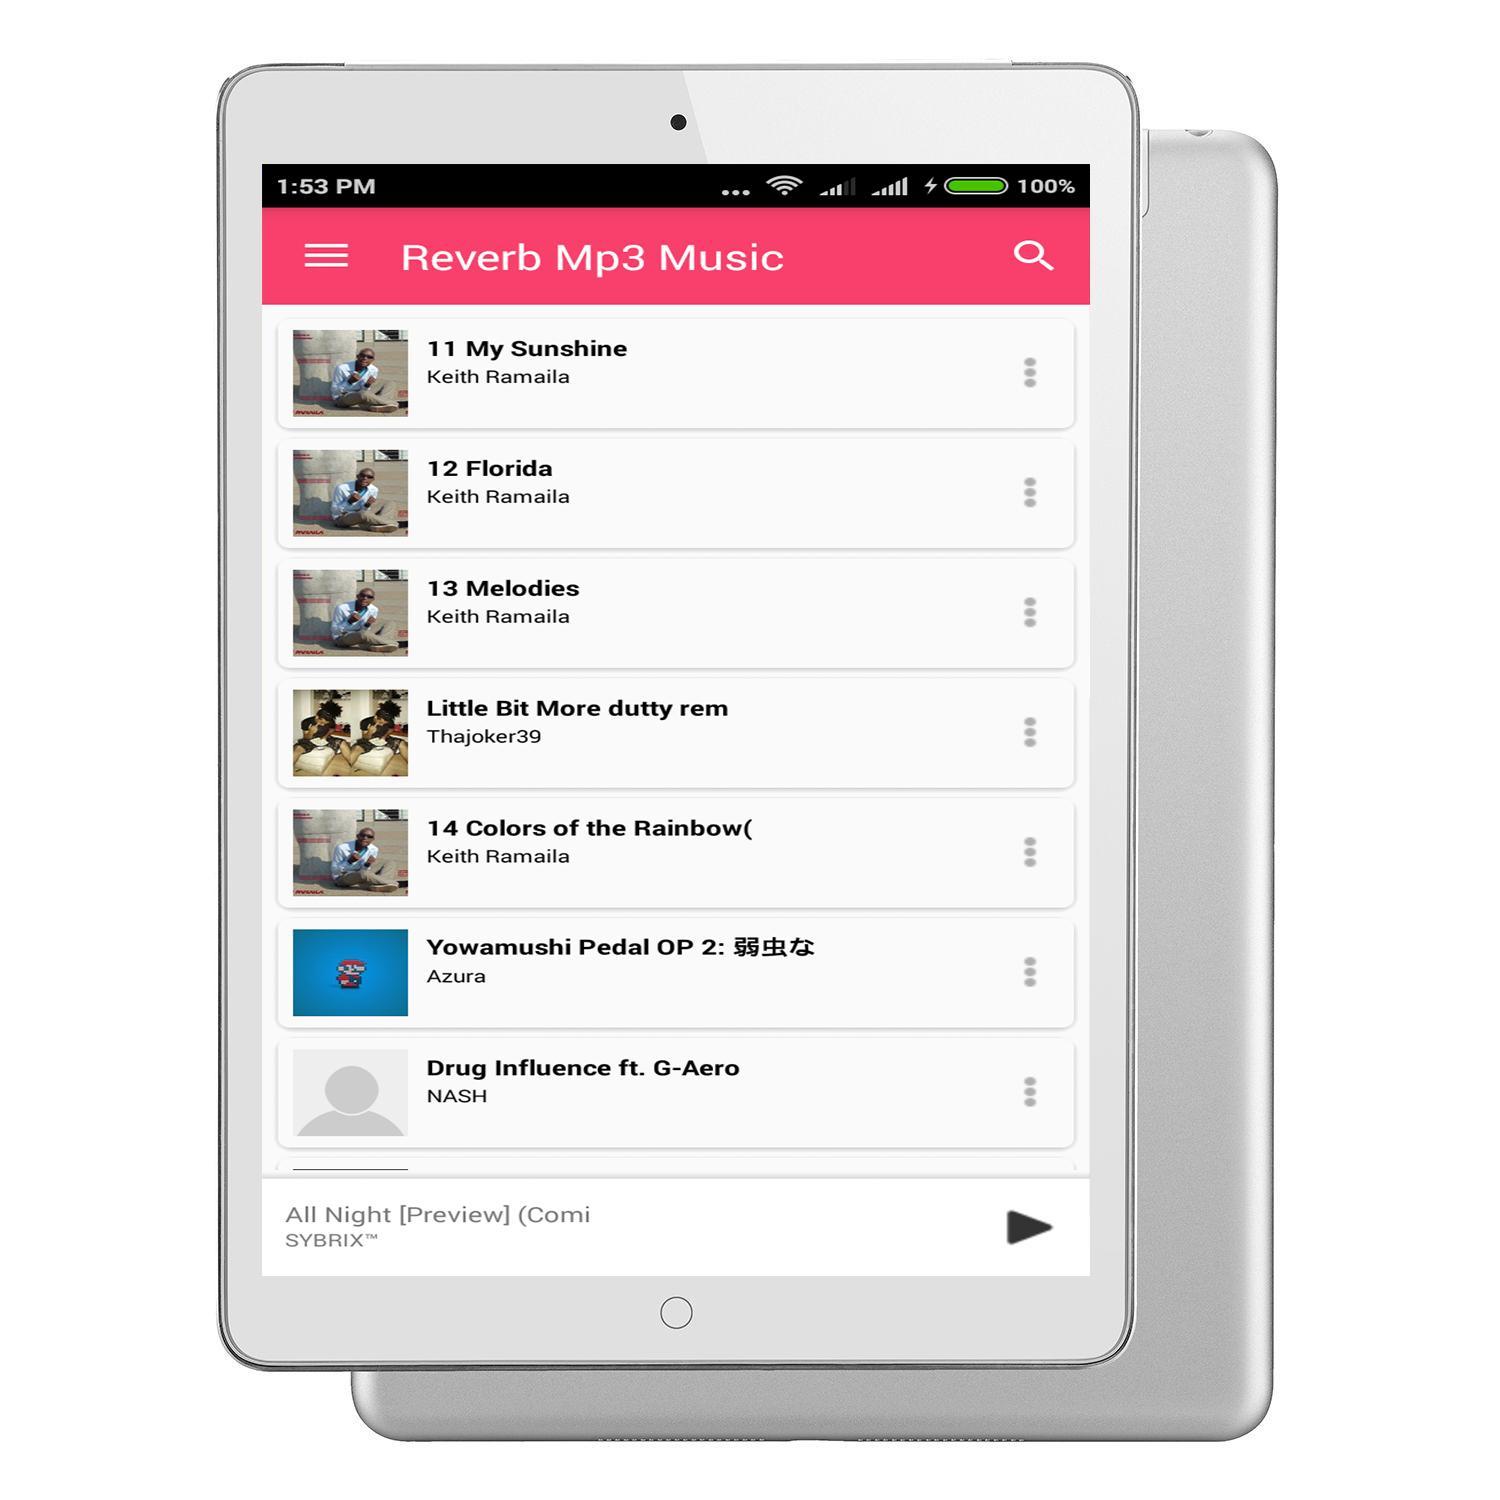 Reverb Mp3 Music for Android - APK Download